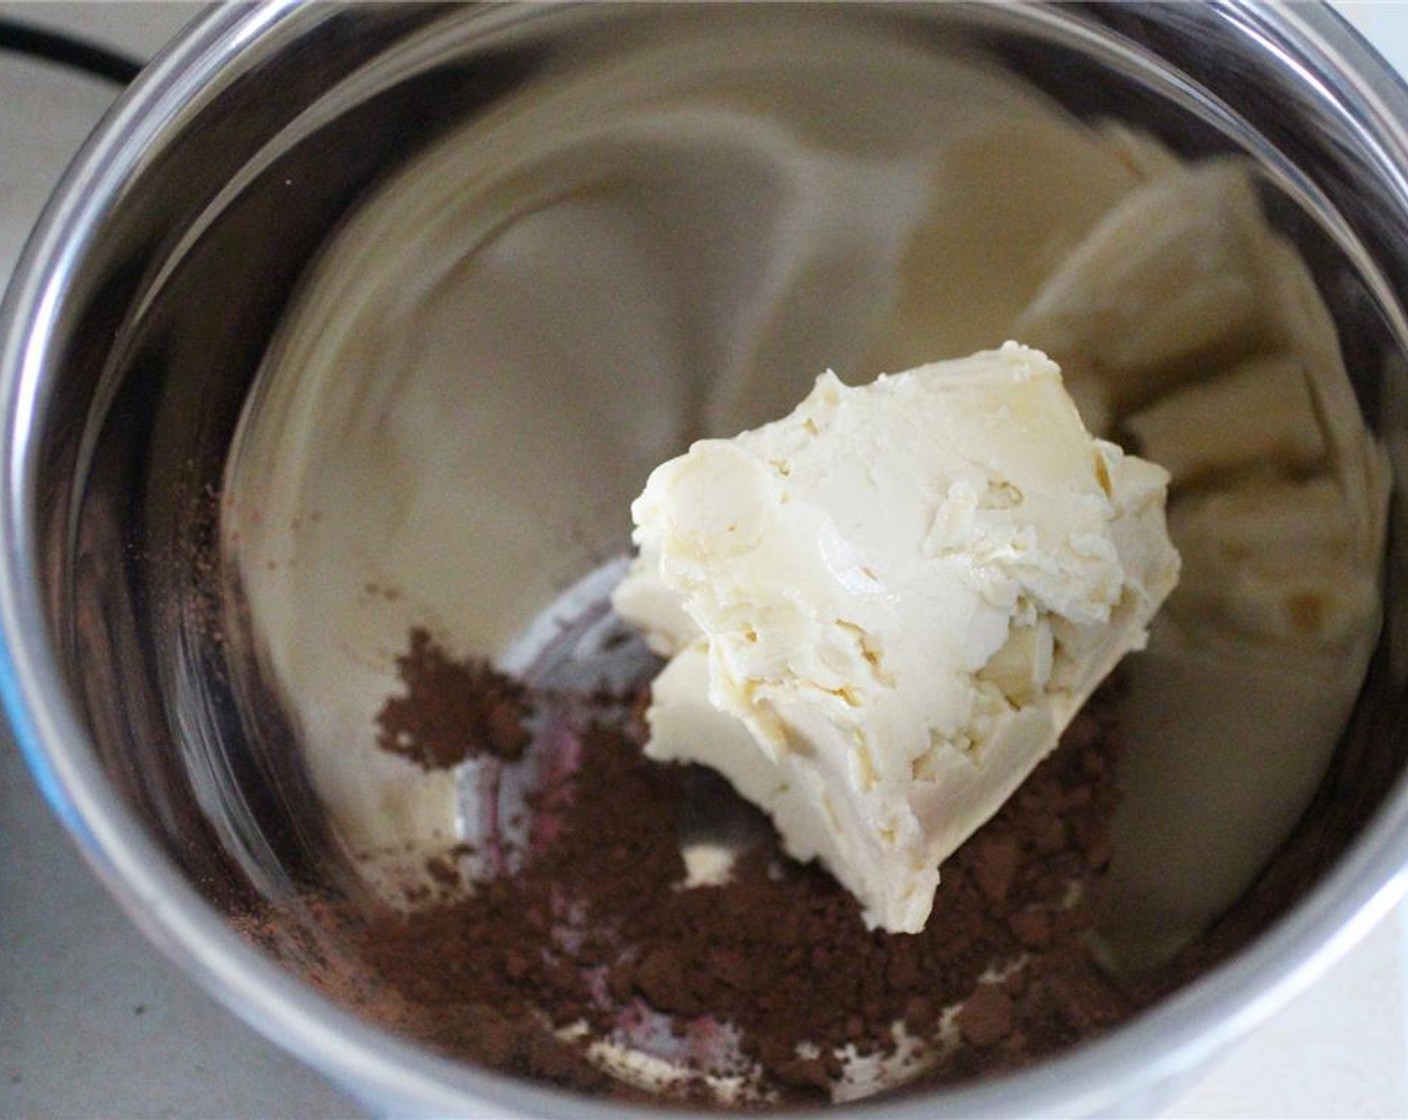 step 7 Melt the Dark Chocolate (2 Tbsp) in a small bowl, and set aside. In a medium bowl, beat together Buttery Spread (1 cup) and Unsweetened Cocoa Powder (1 Tbsp).